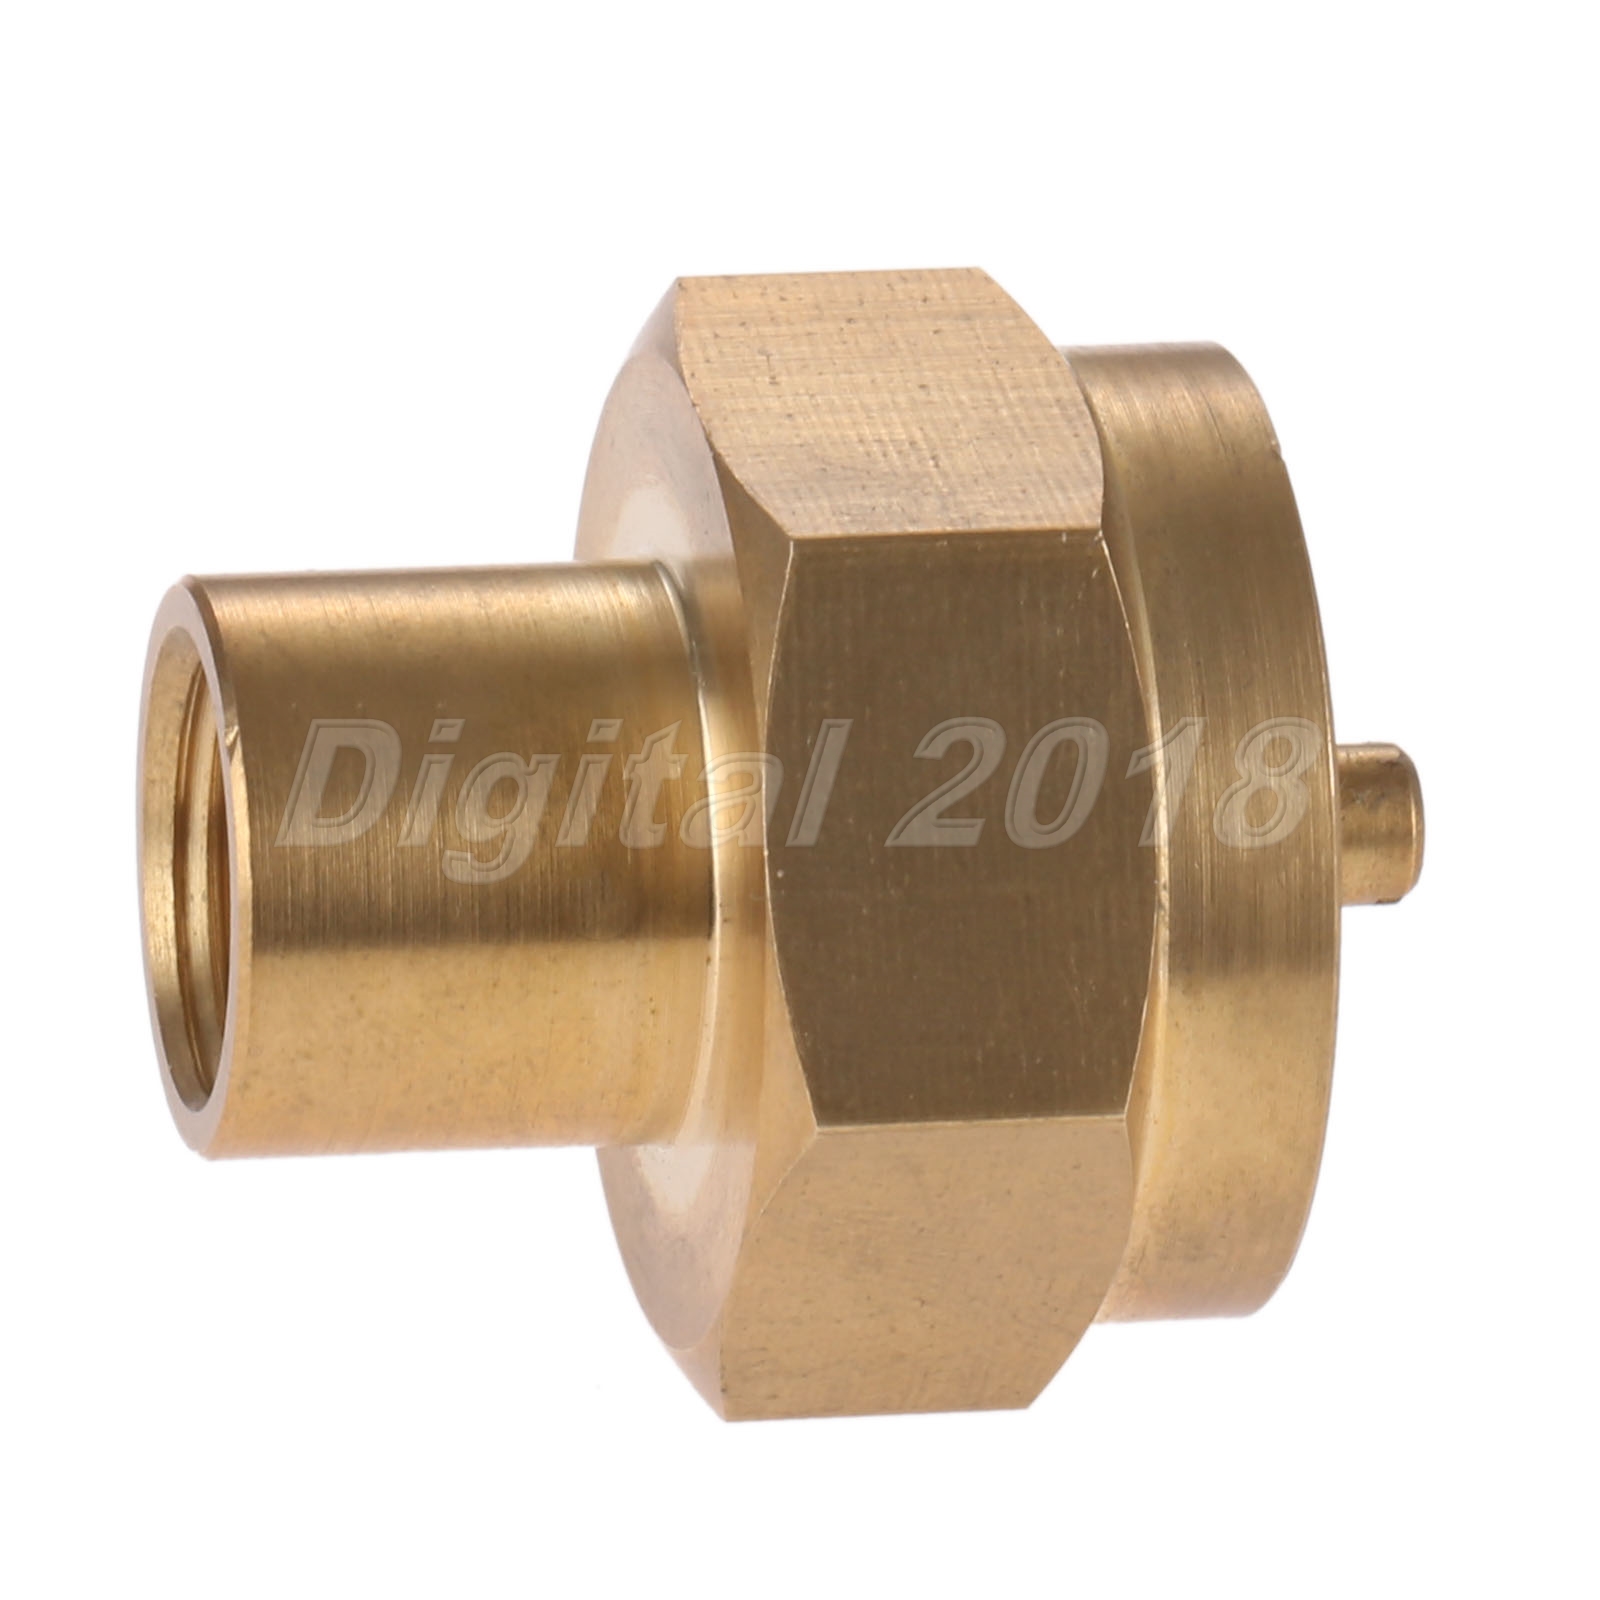 Hooshing 1LB Propane Gas Bottle Refill Adapter Kit 1/4 Male NPT Tank Brass  Fitting and 1/4 Female NPT Thread Cylinder Grill Stove Connector